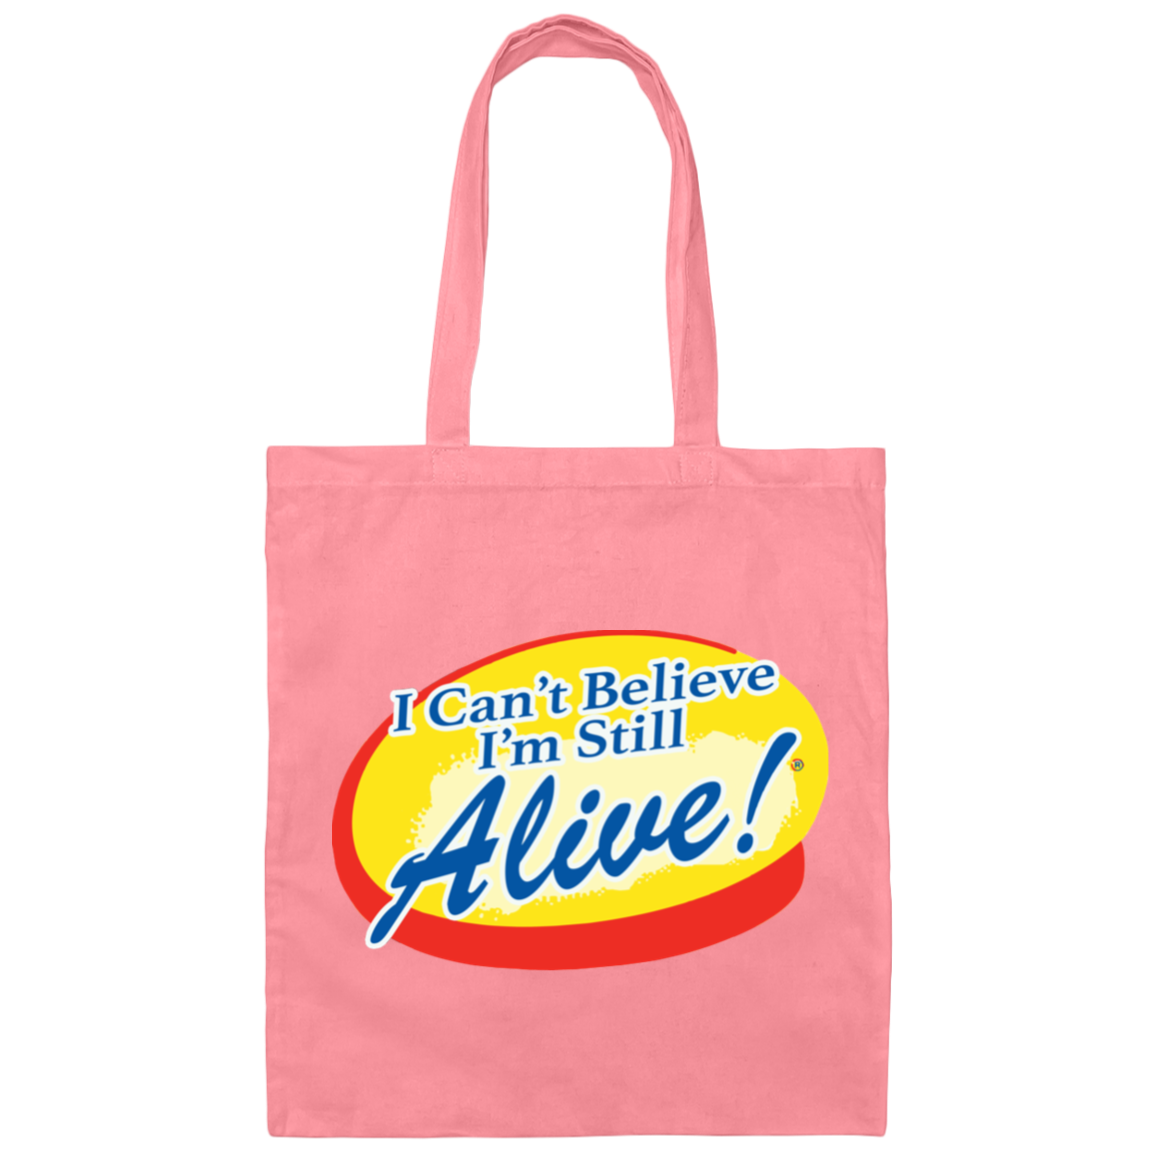 I Can't Believe I'm Still Alive! Canvas Tote Bag